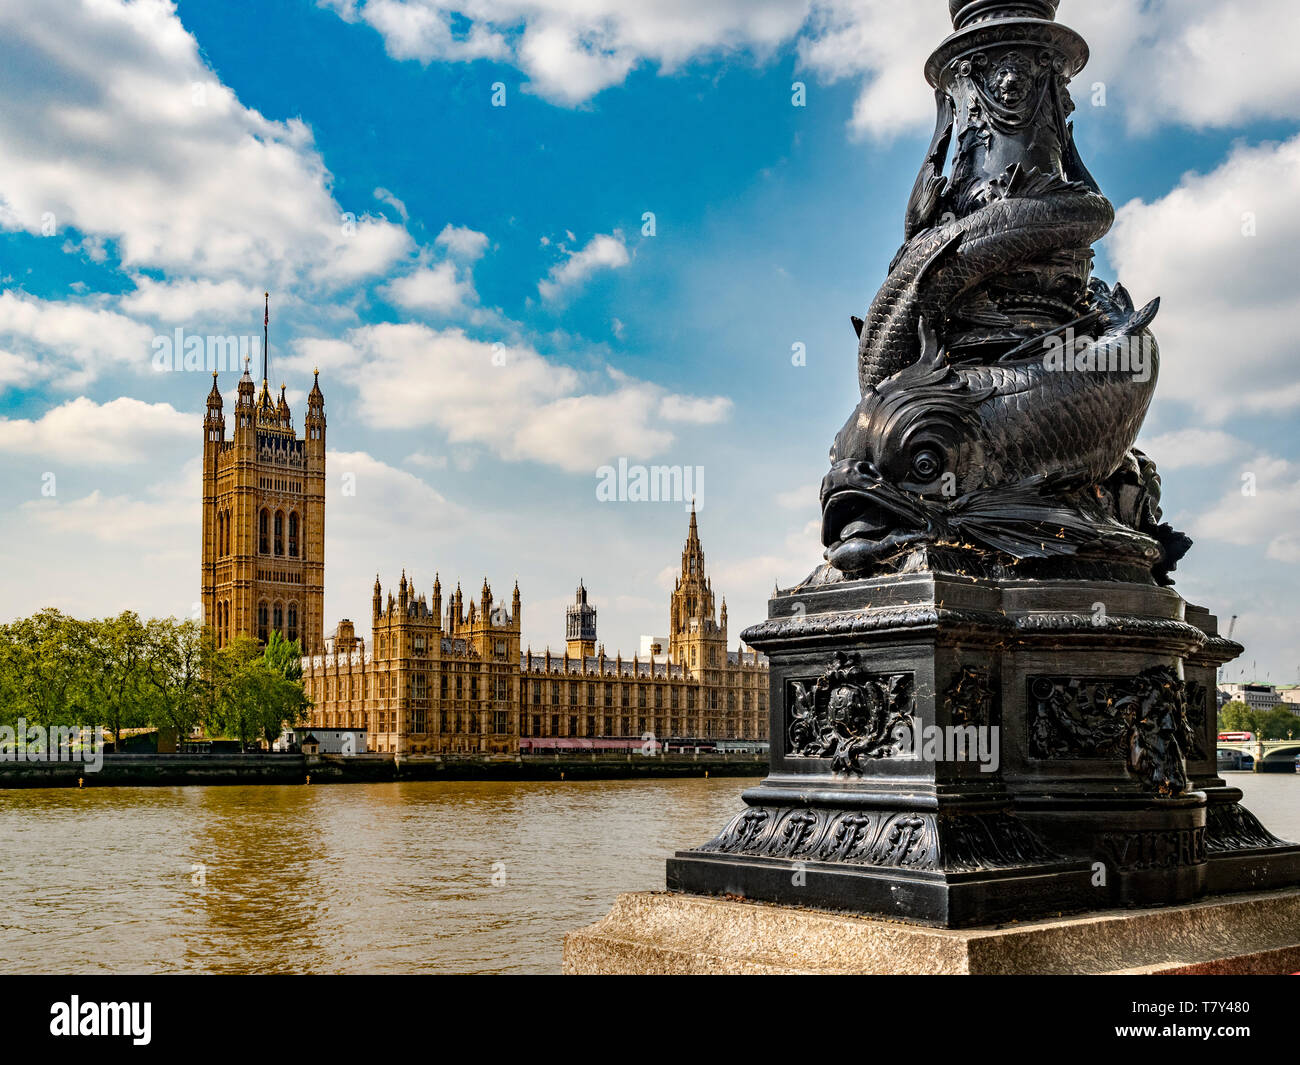 Dolphin lamposts along River Thames, featuring Sturgeon fish design by George John Vulliamy and modelled by Charles Henry Mabey in the 1870's. Stock Photo